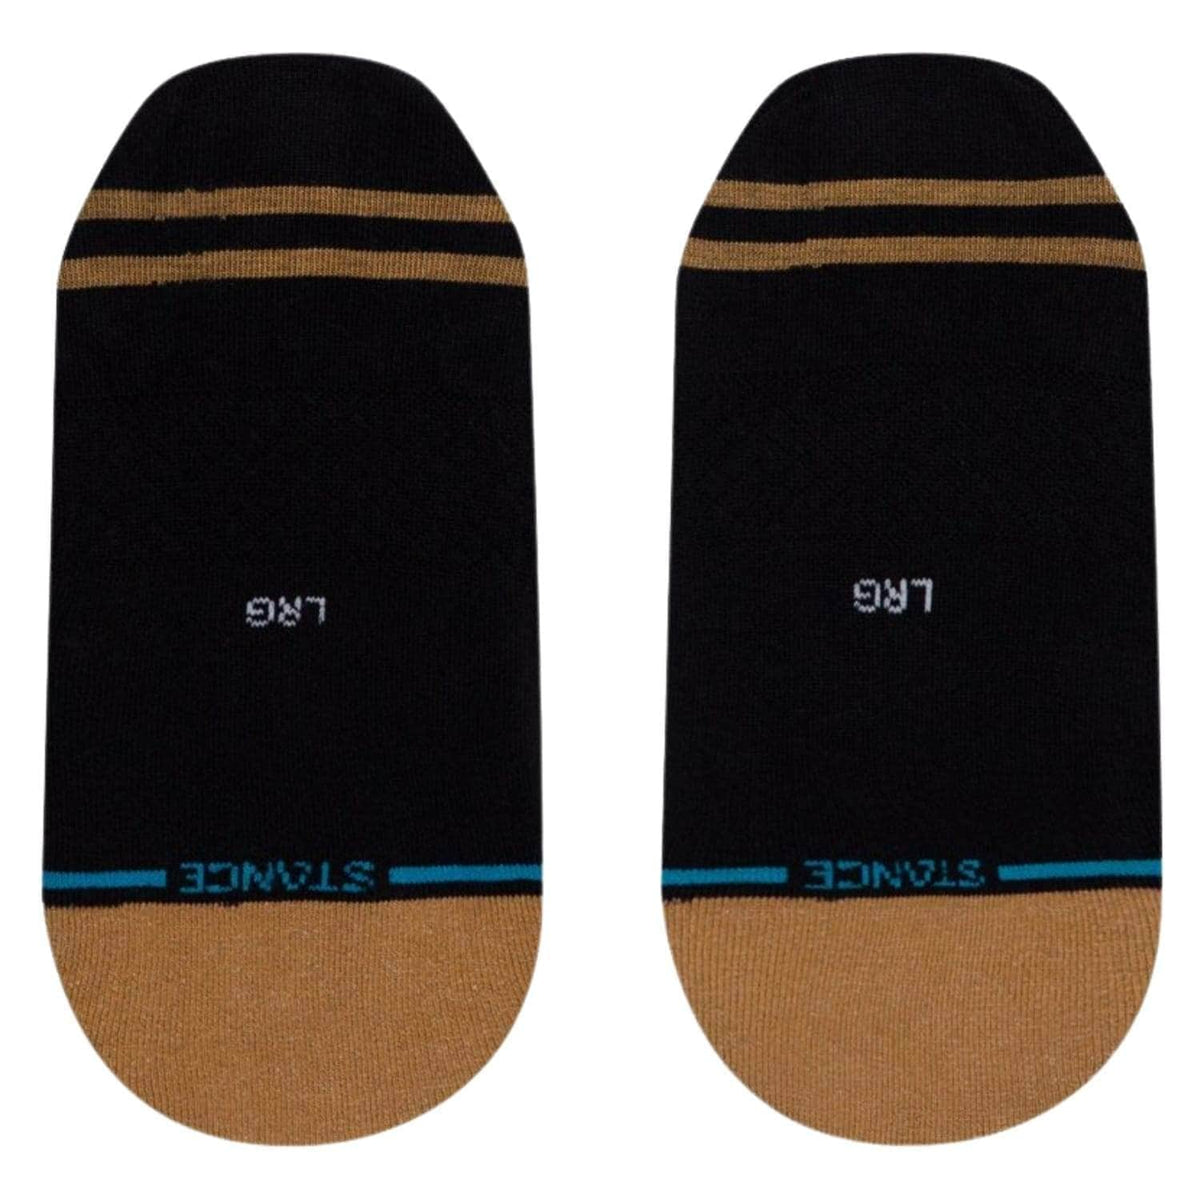 Stance Gamut 2 Invisible Socks - Black/Brown - Mens Invisible/No Show Socks by Stance